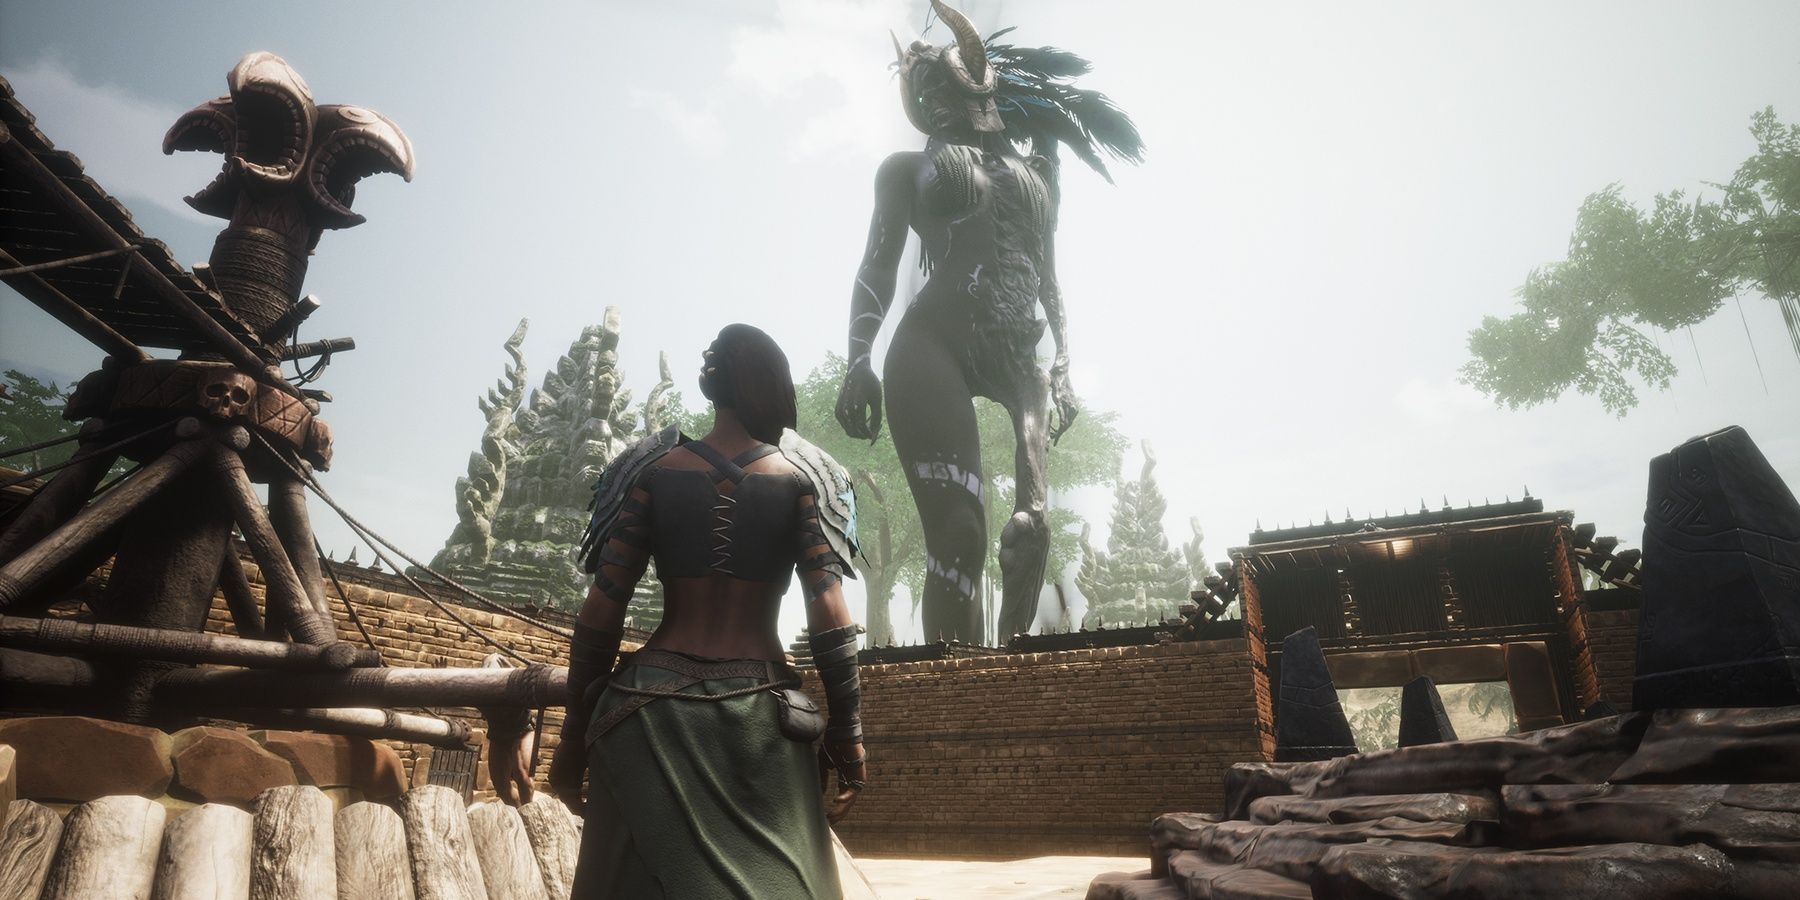 snippet from the game Conan Exiles